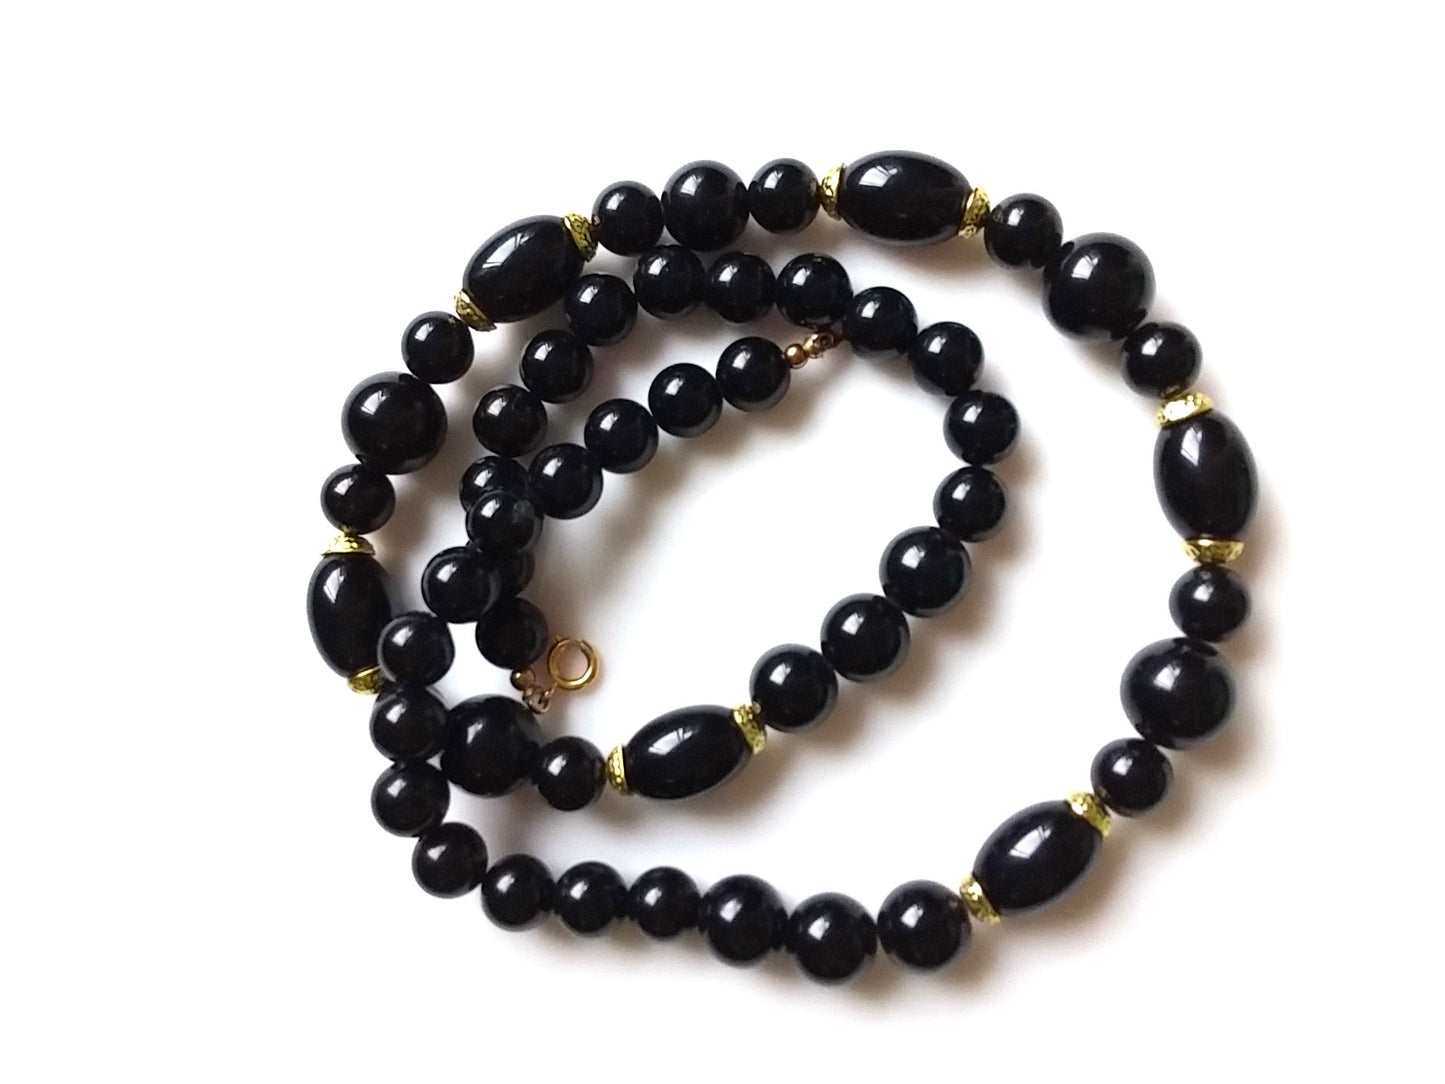 Vintage Black and Gold Beaded "20 Necklace - Dirty 30 Vintage | Vintage Clothing, Vintage Jewelry, Vintage Accessories